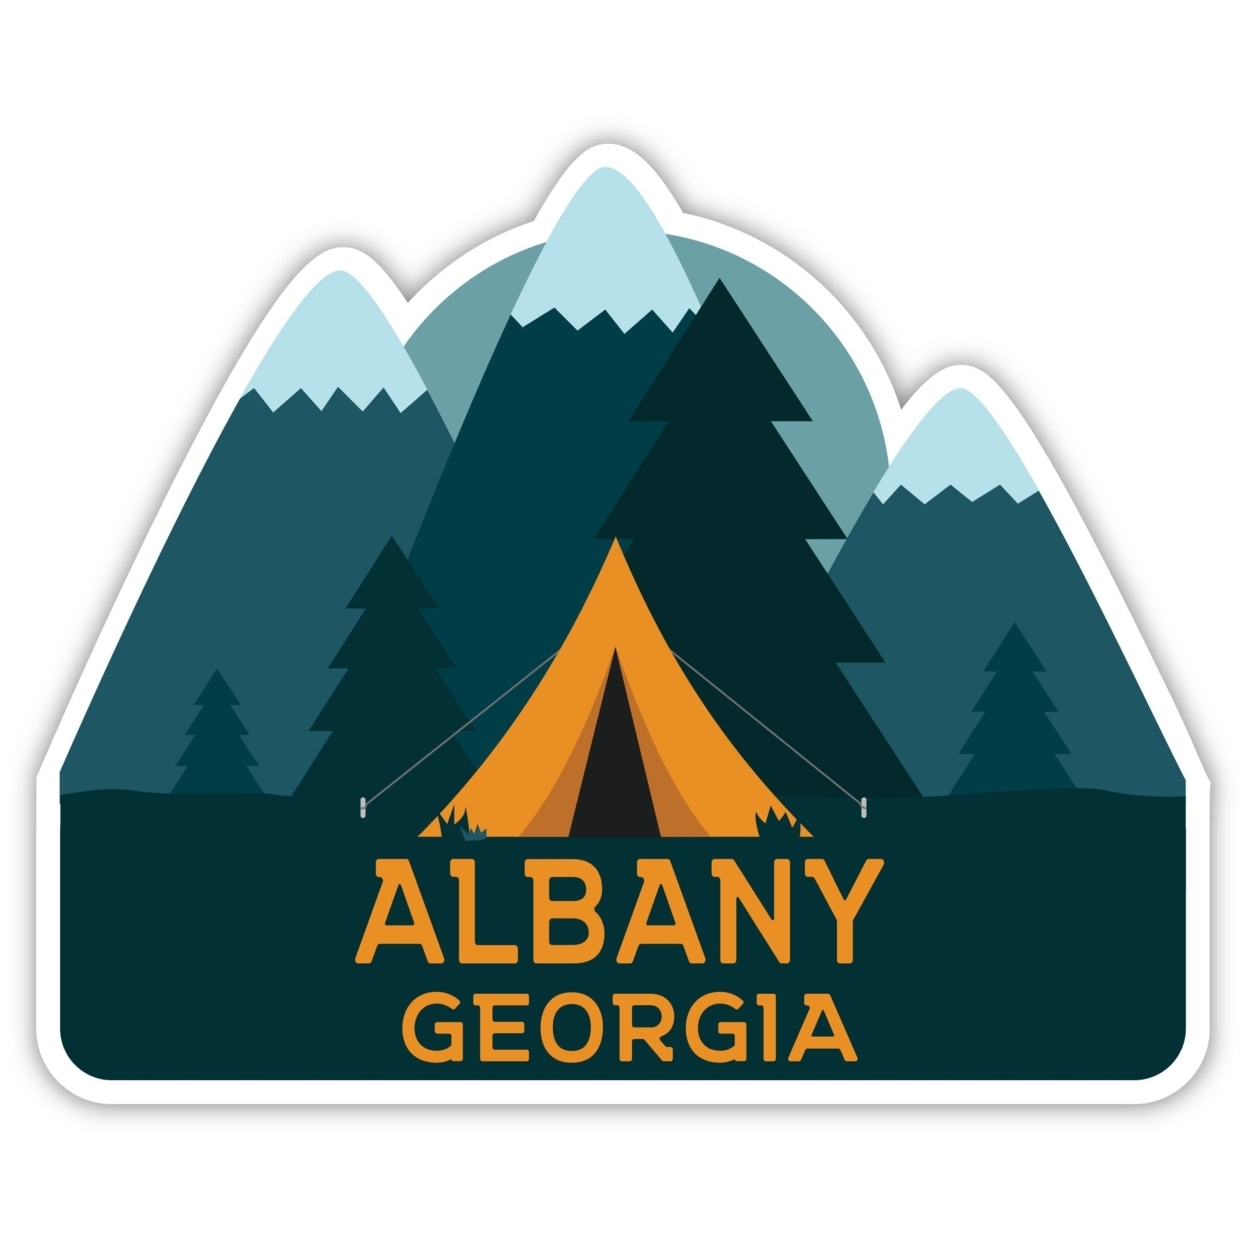 Albany Georgia Souvenir Decorative Stickers (Choose Theme And Size) - 4-Pack, 6-Inch, Tent